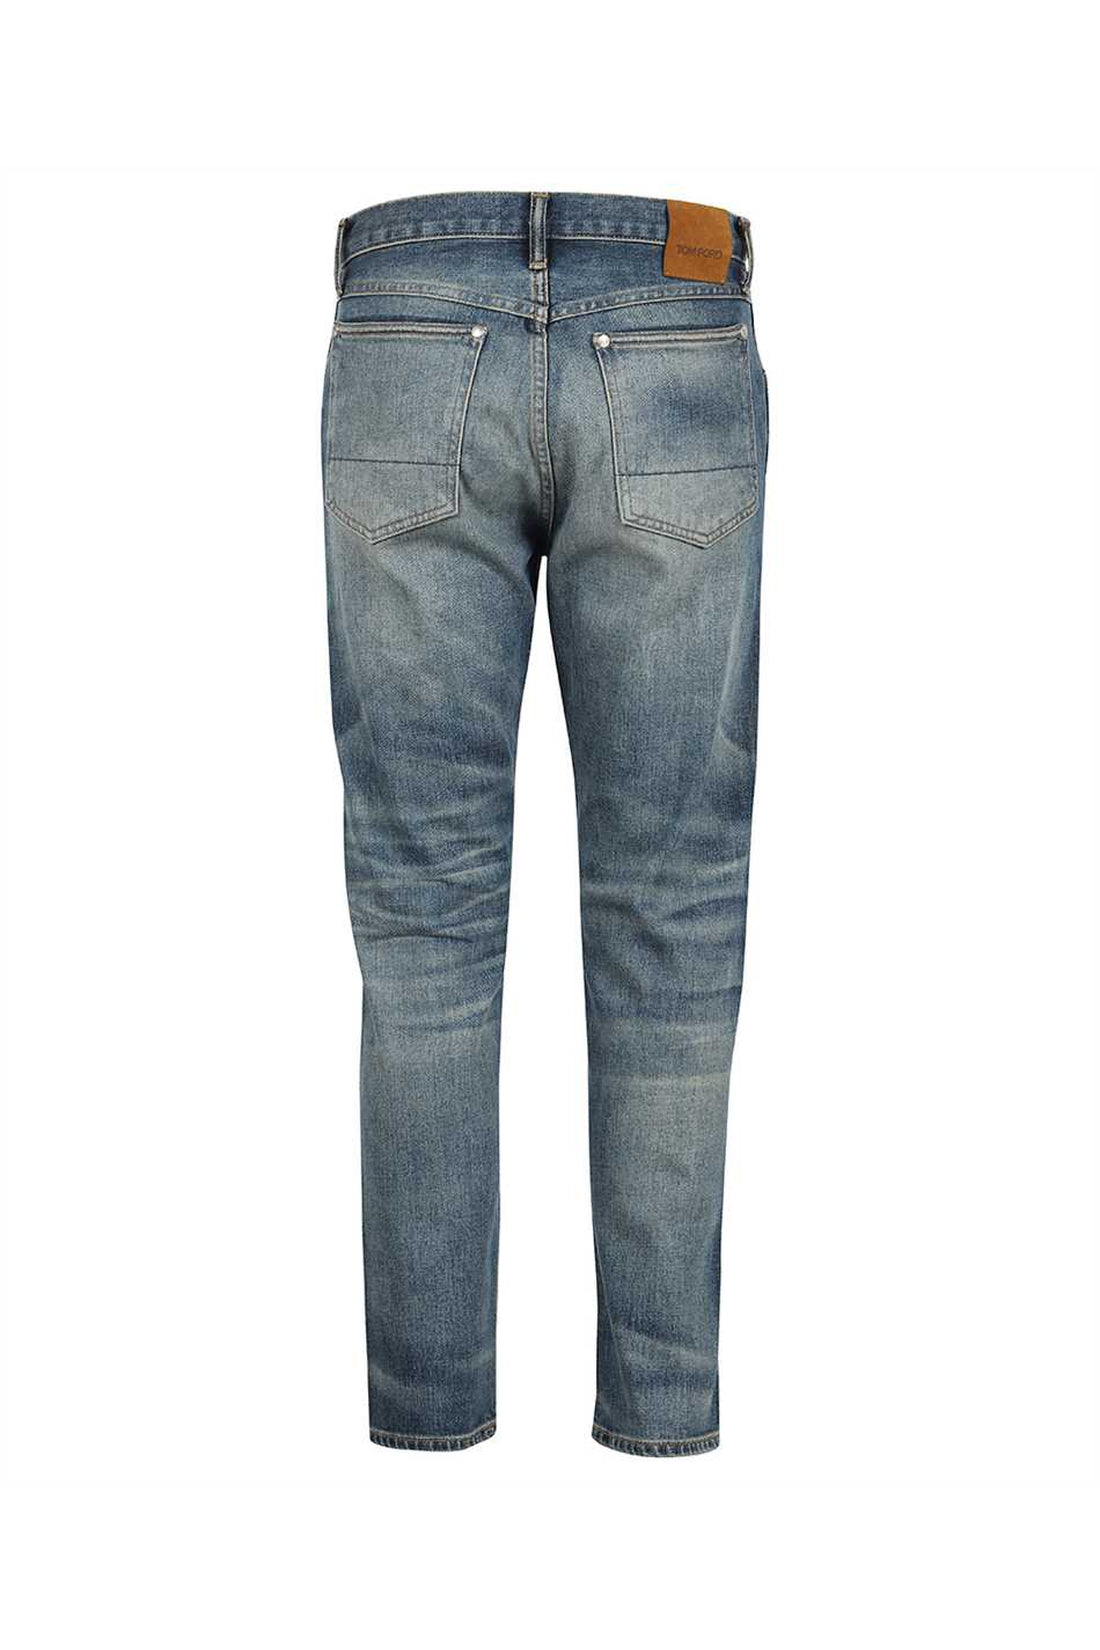 Tom Ford-OUTLET-SALE-Tapered fit jeans-ARCHIVIST